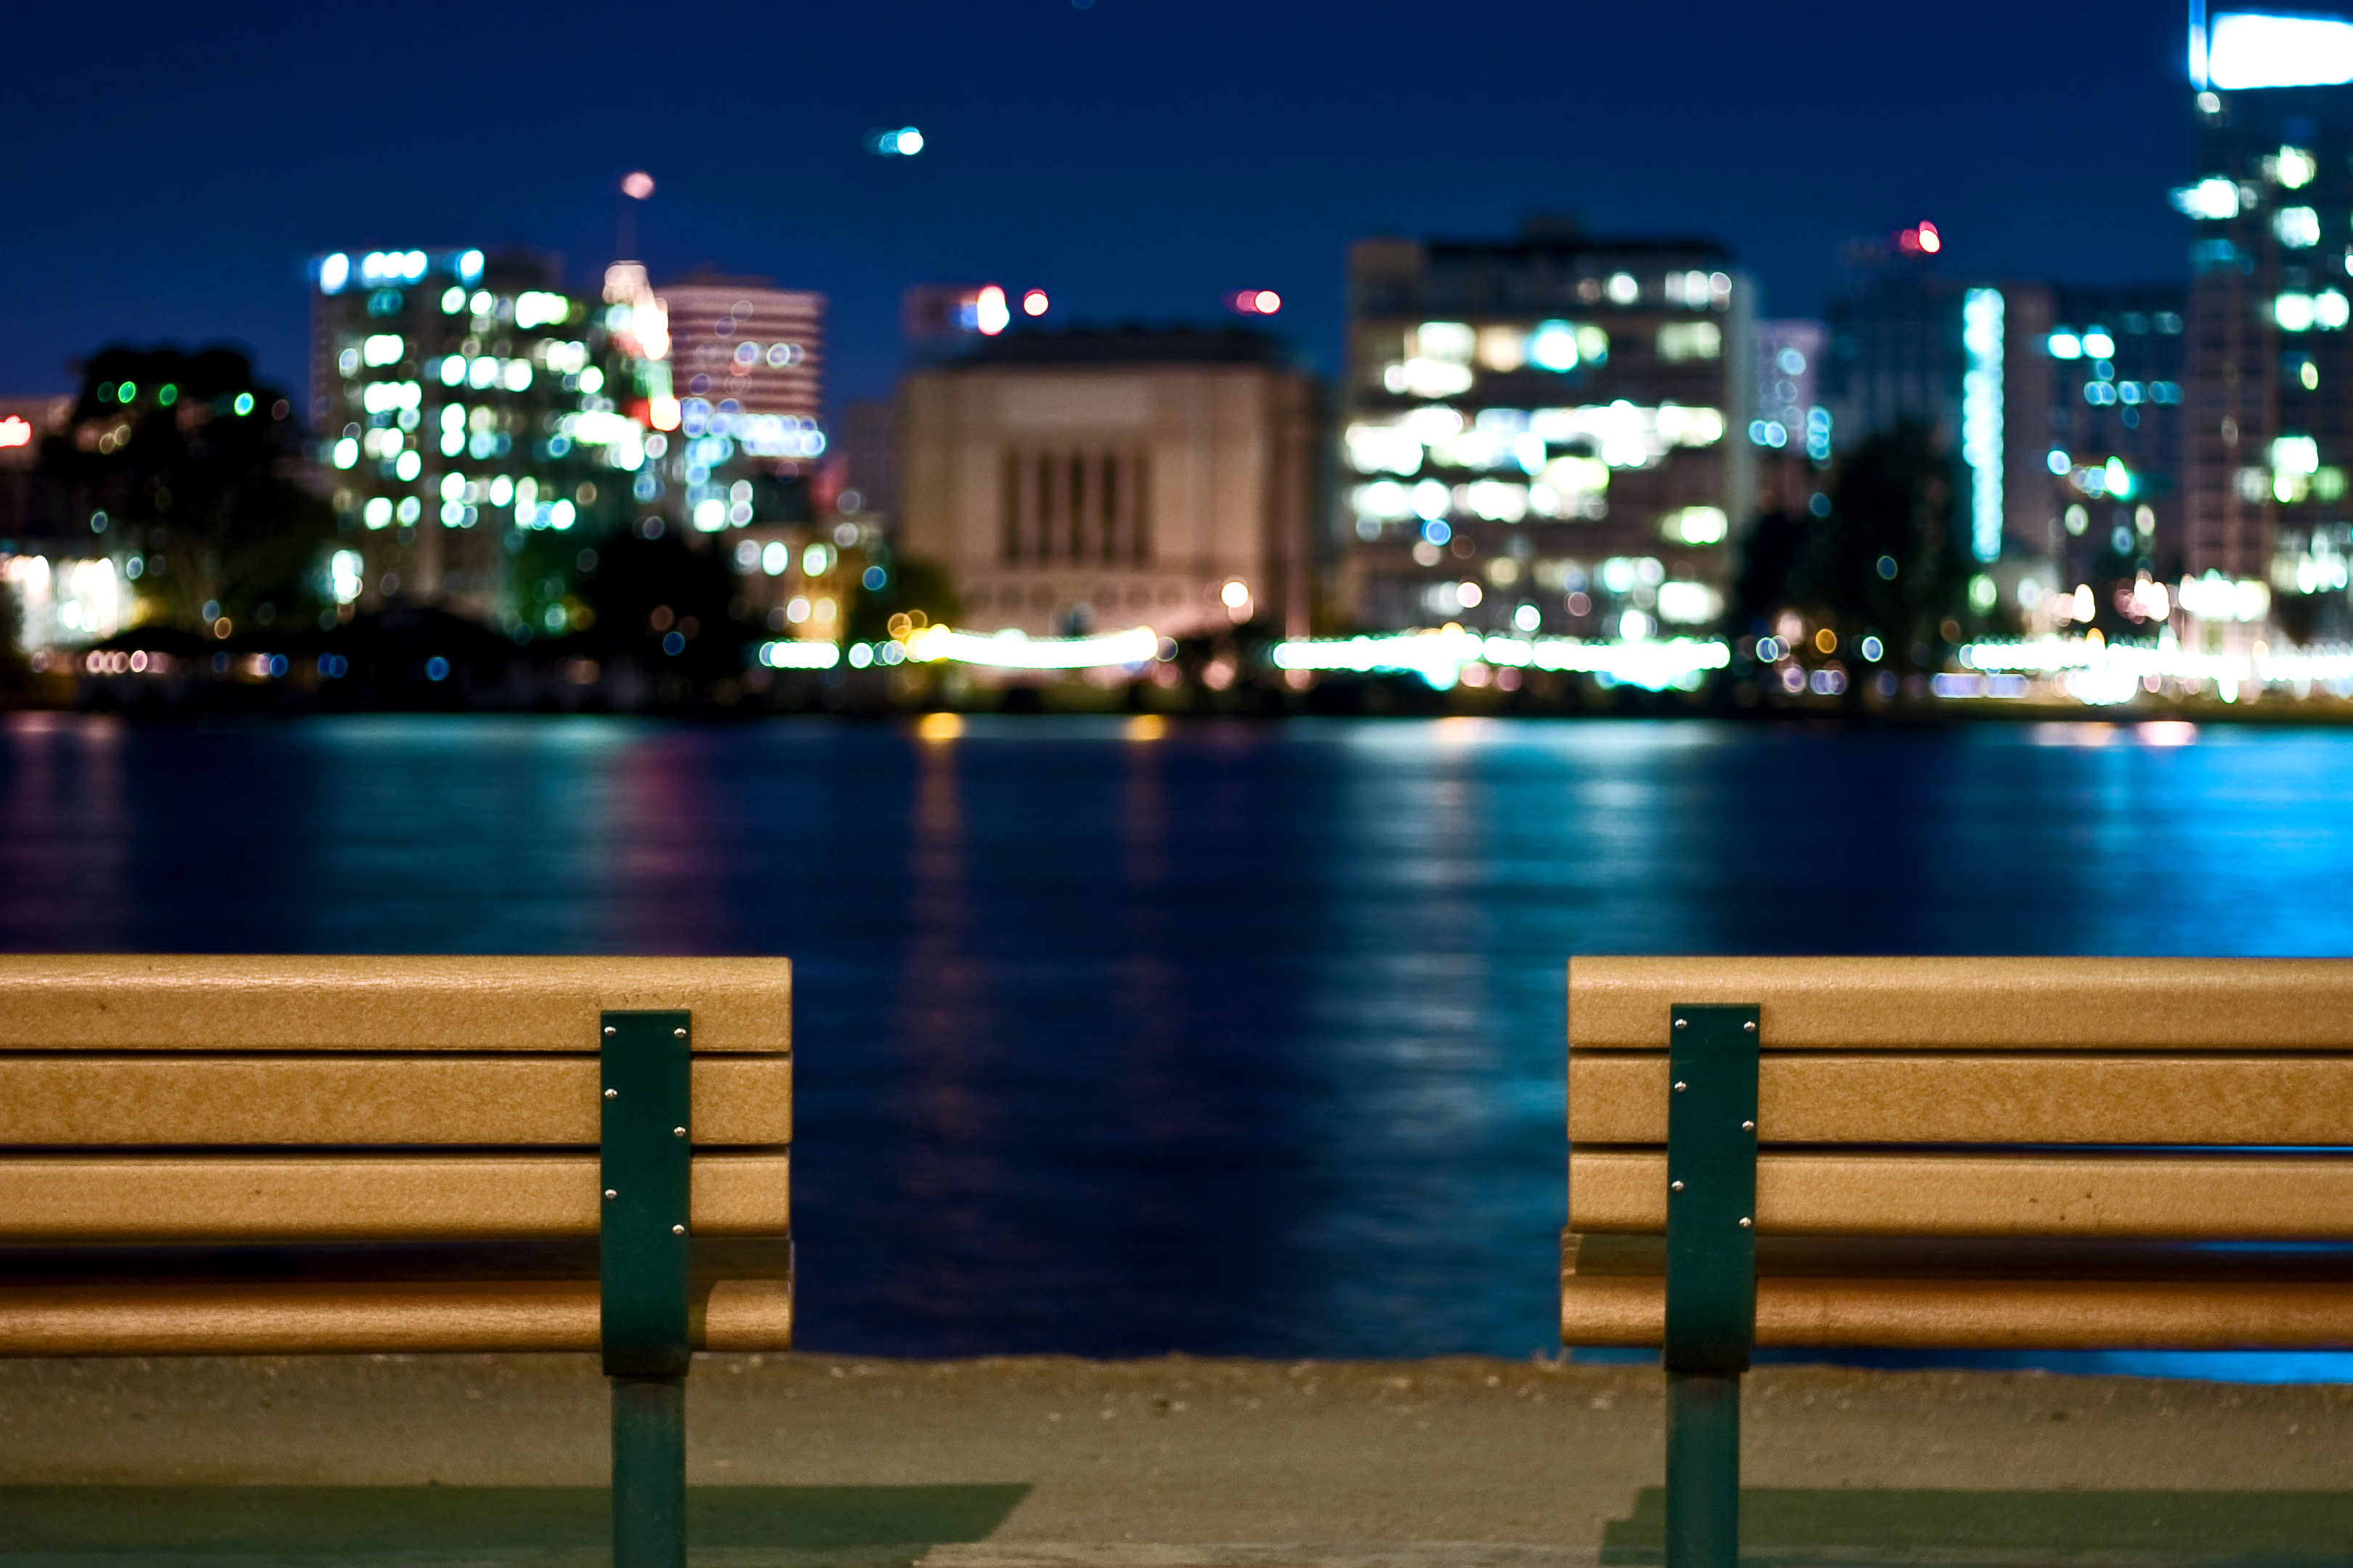 Lit benches overlooking city and body of water at night.